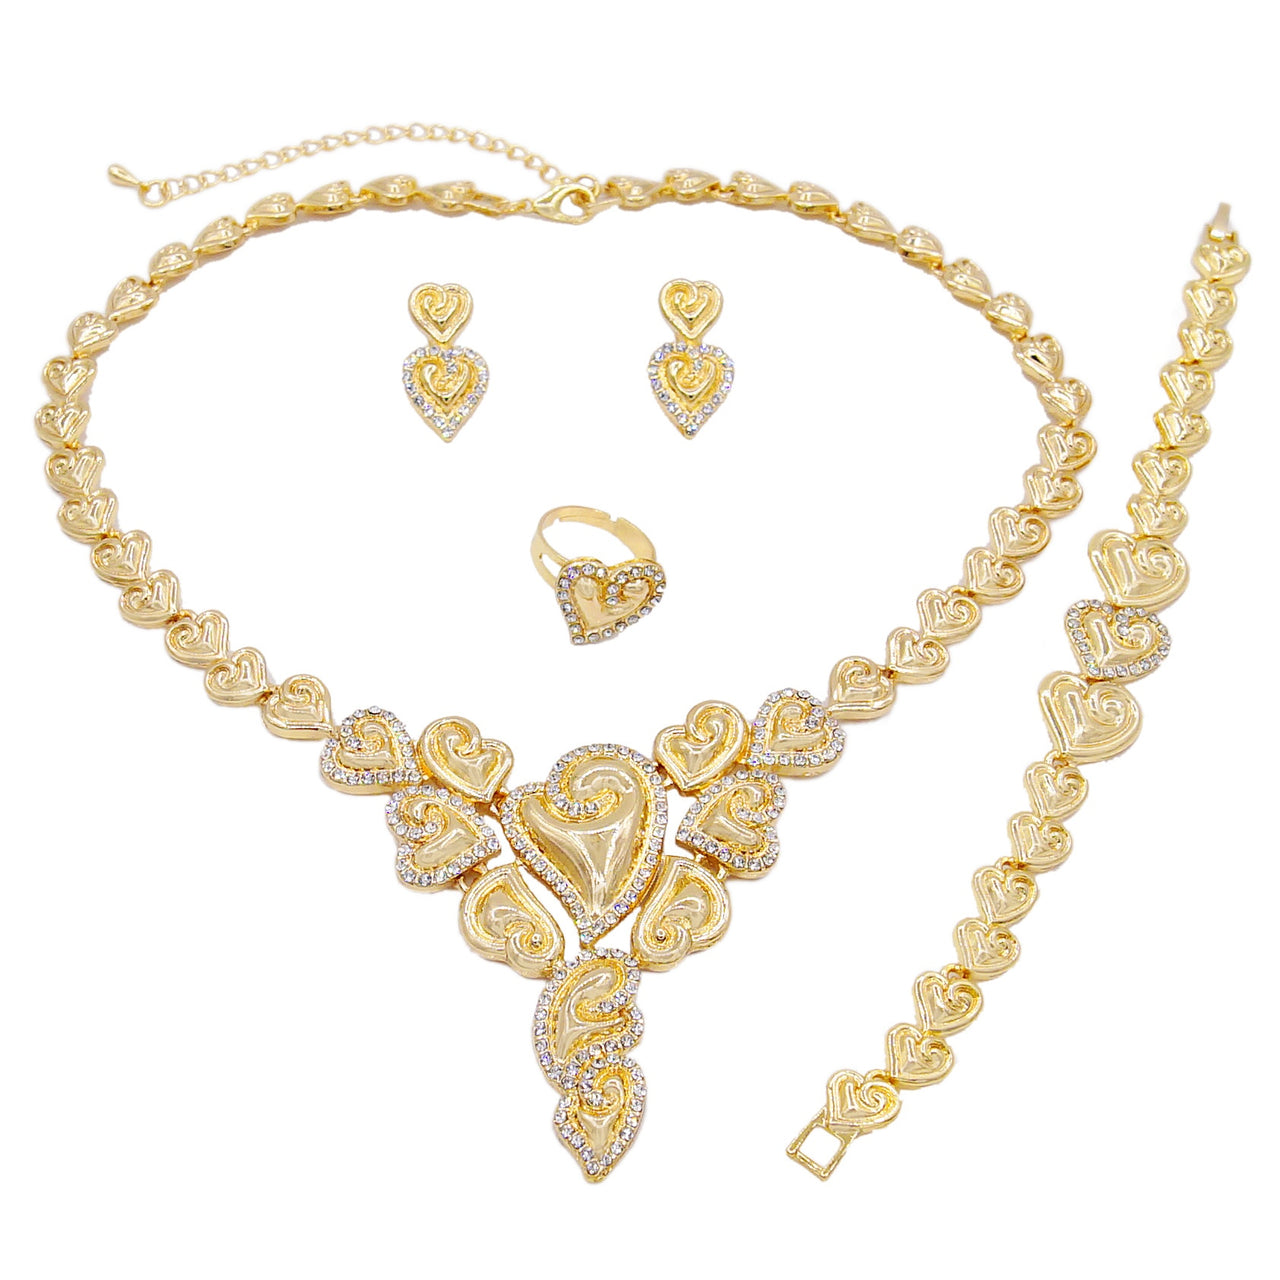 Queen of Crystal Hearts Jewelry Set